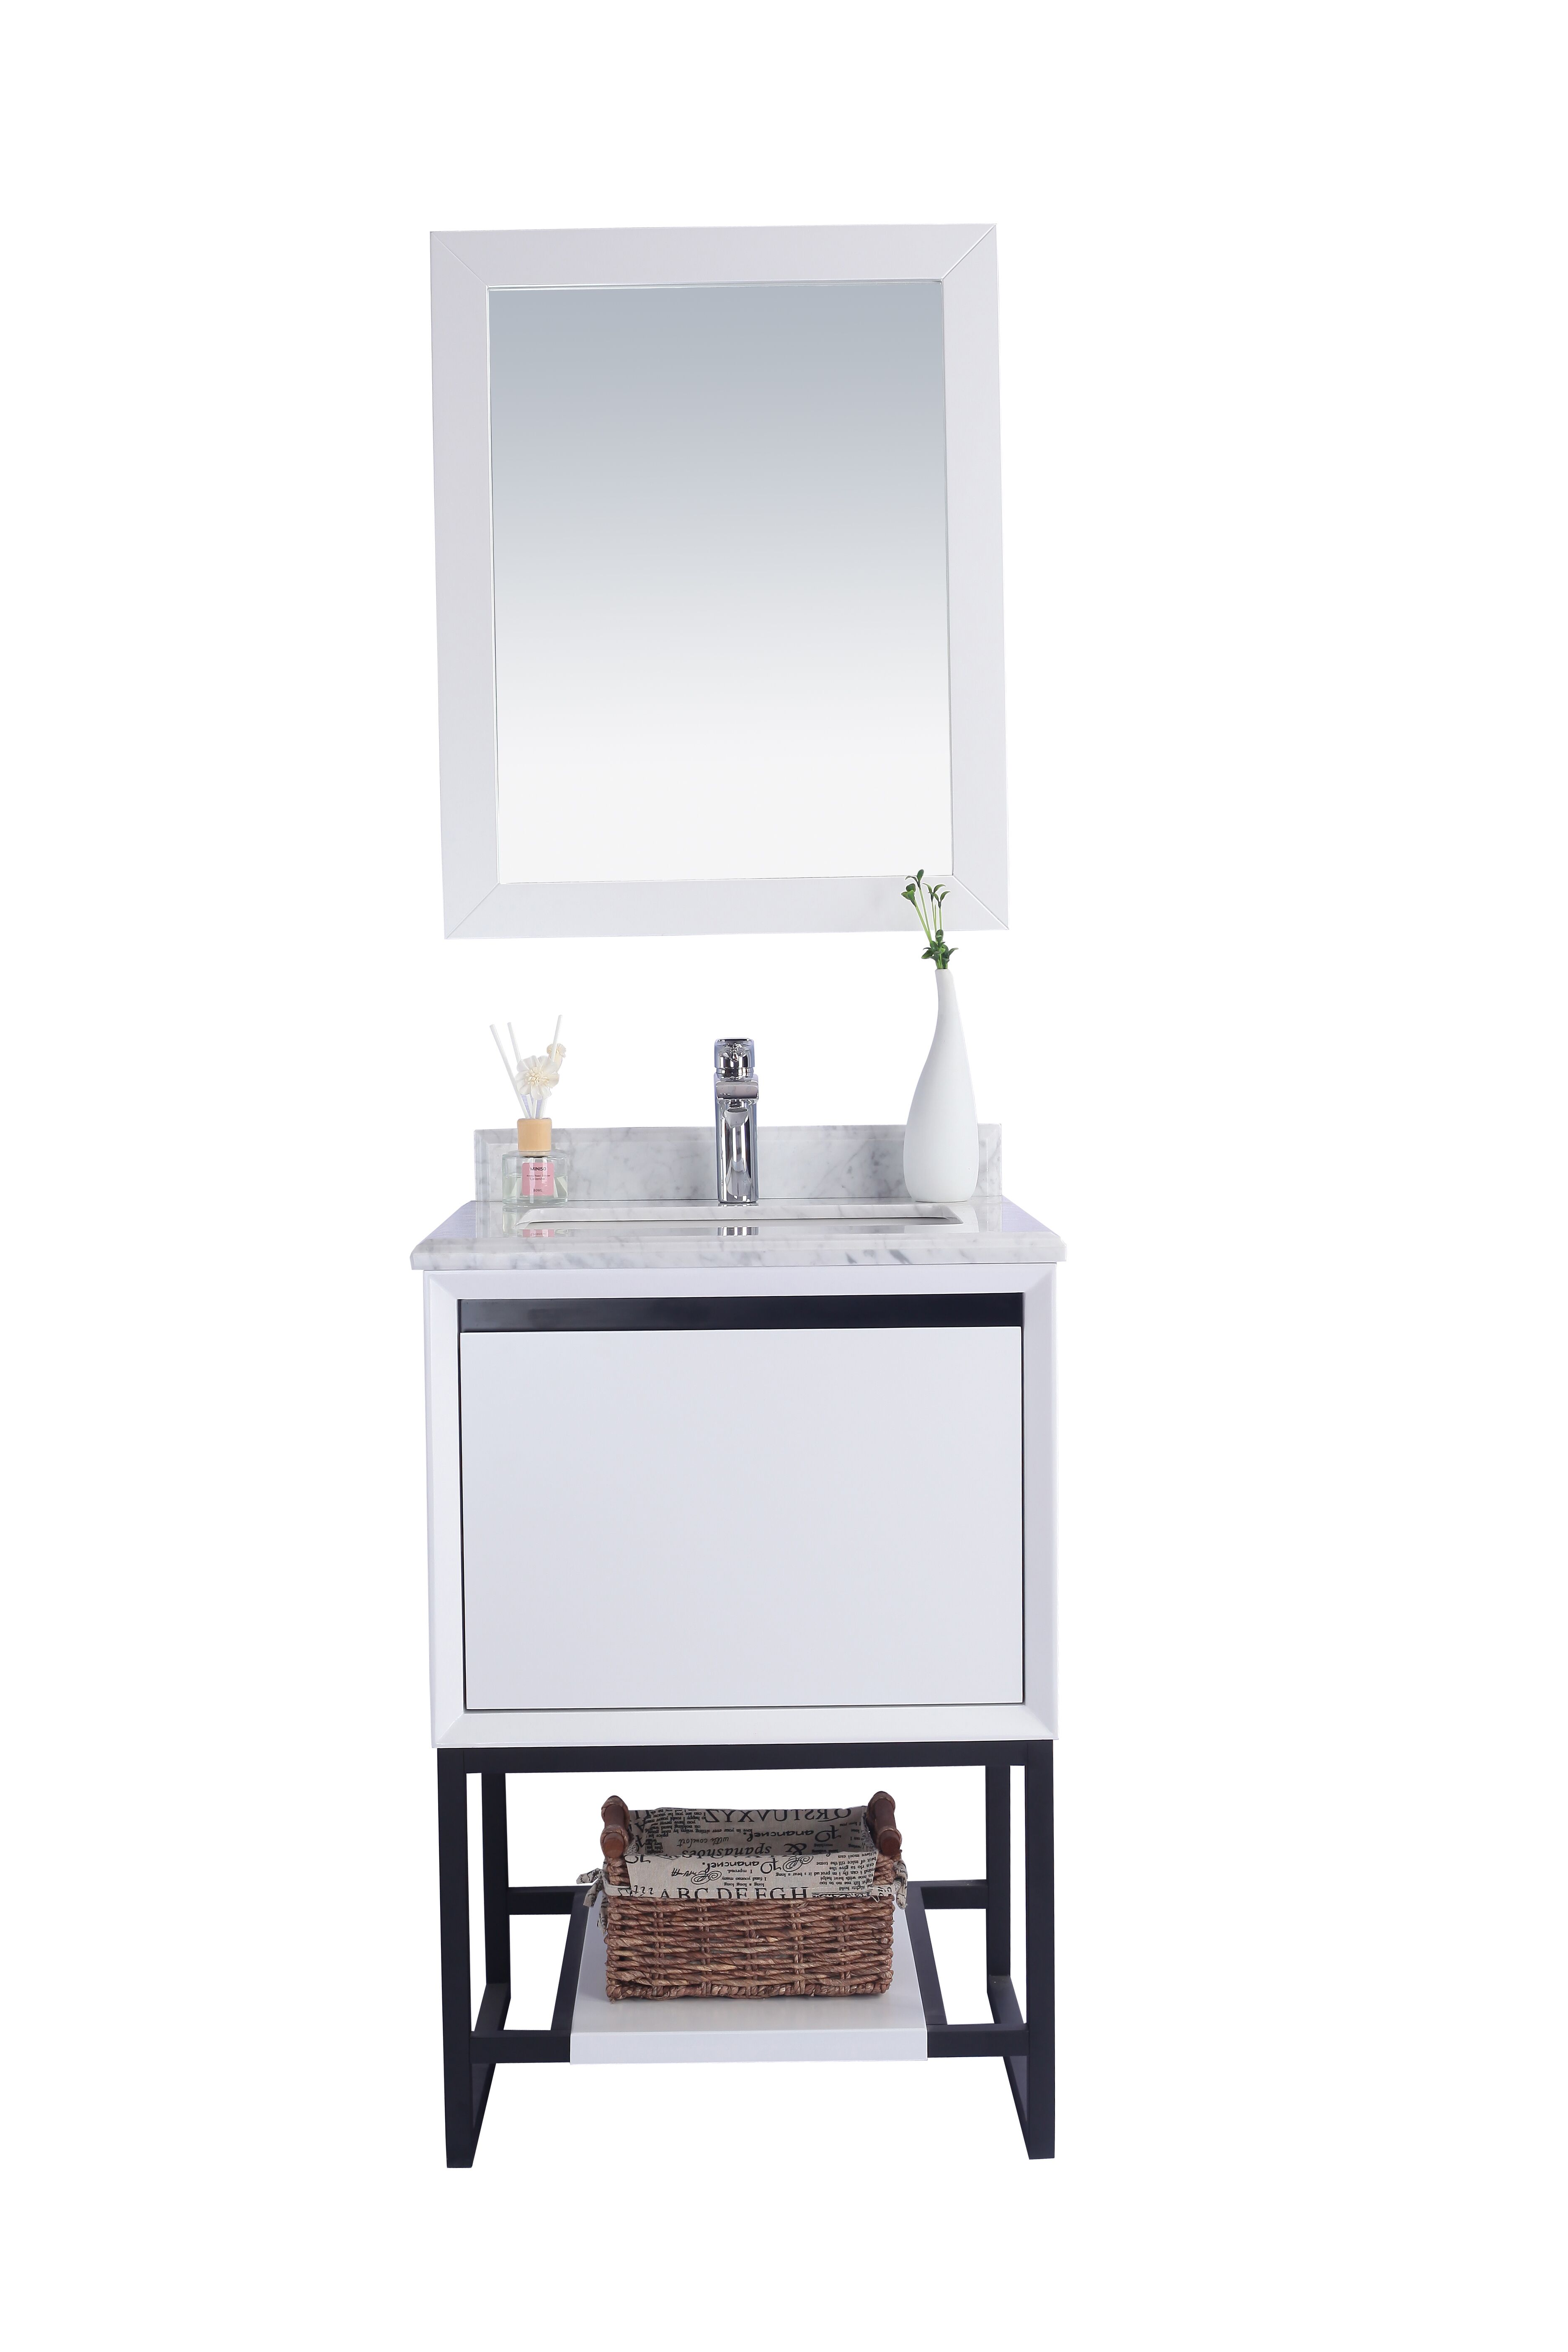 24" White Bathroom Vanity Cabinet with Top and Mirror Options